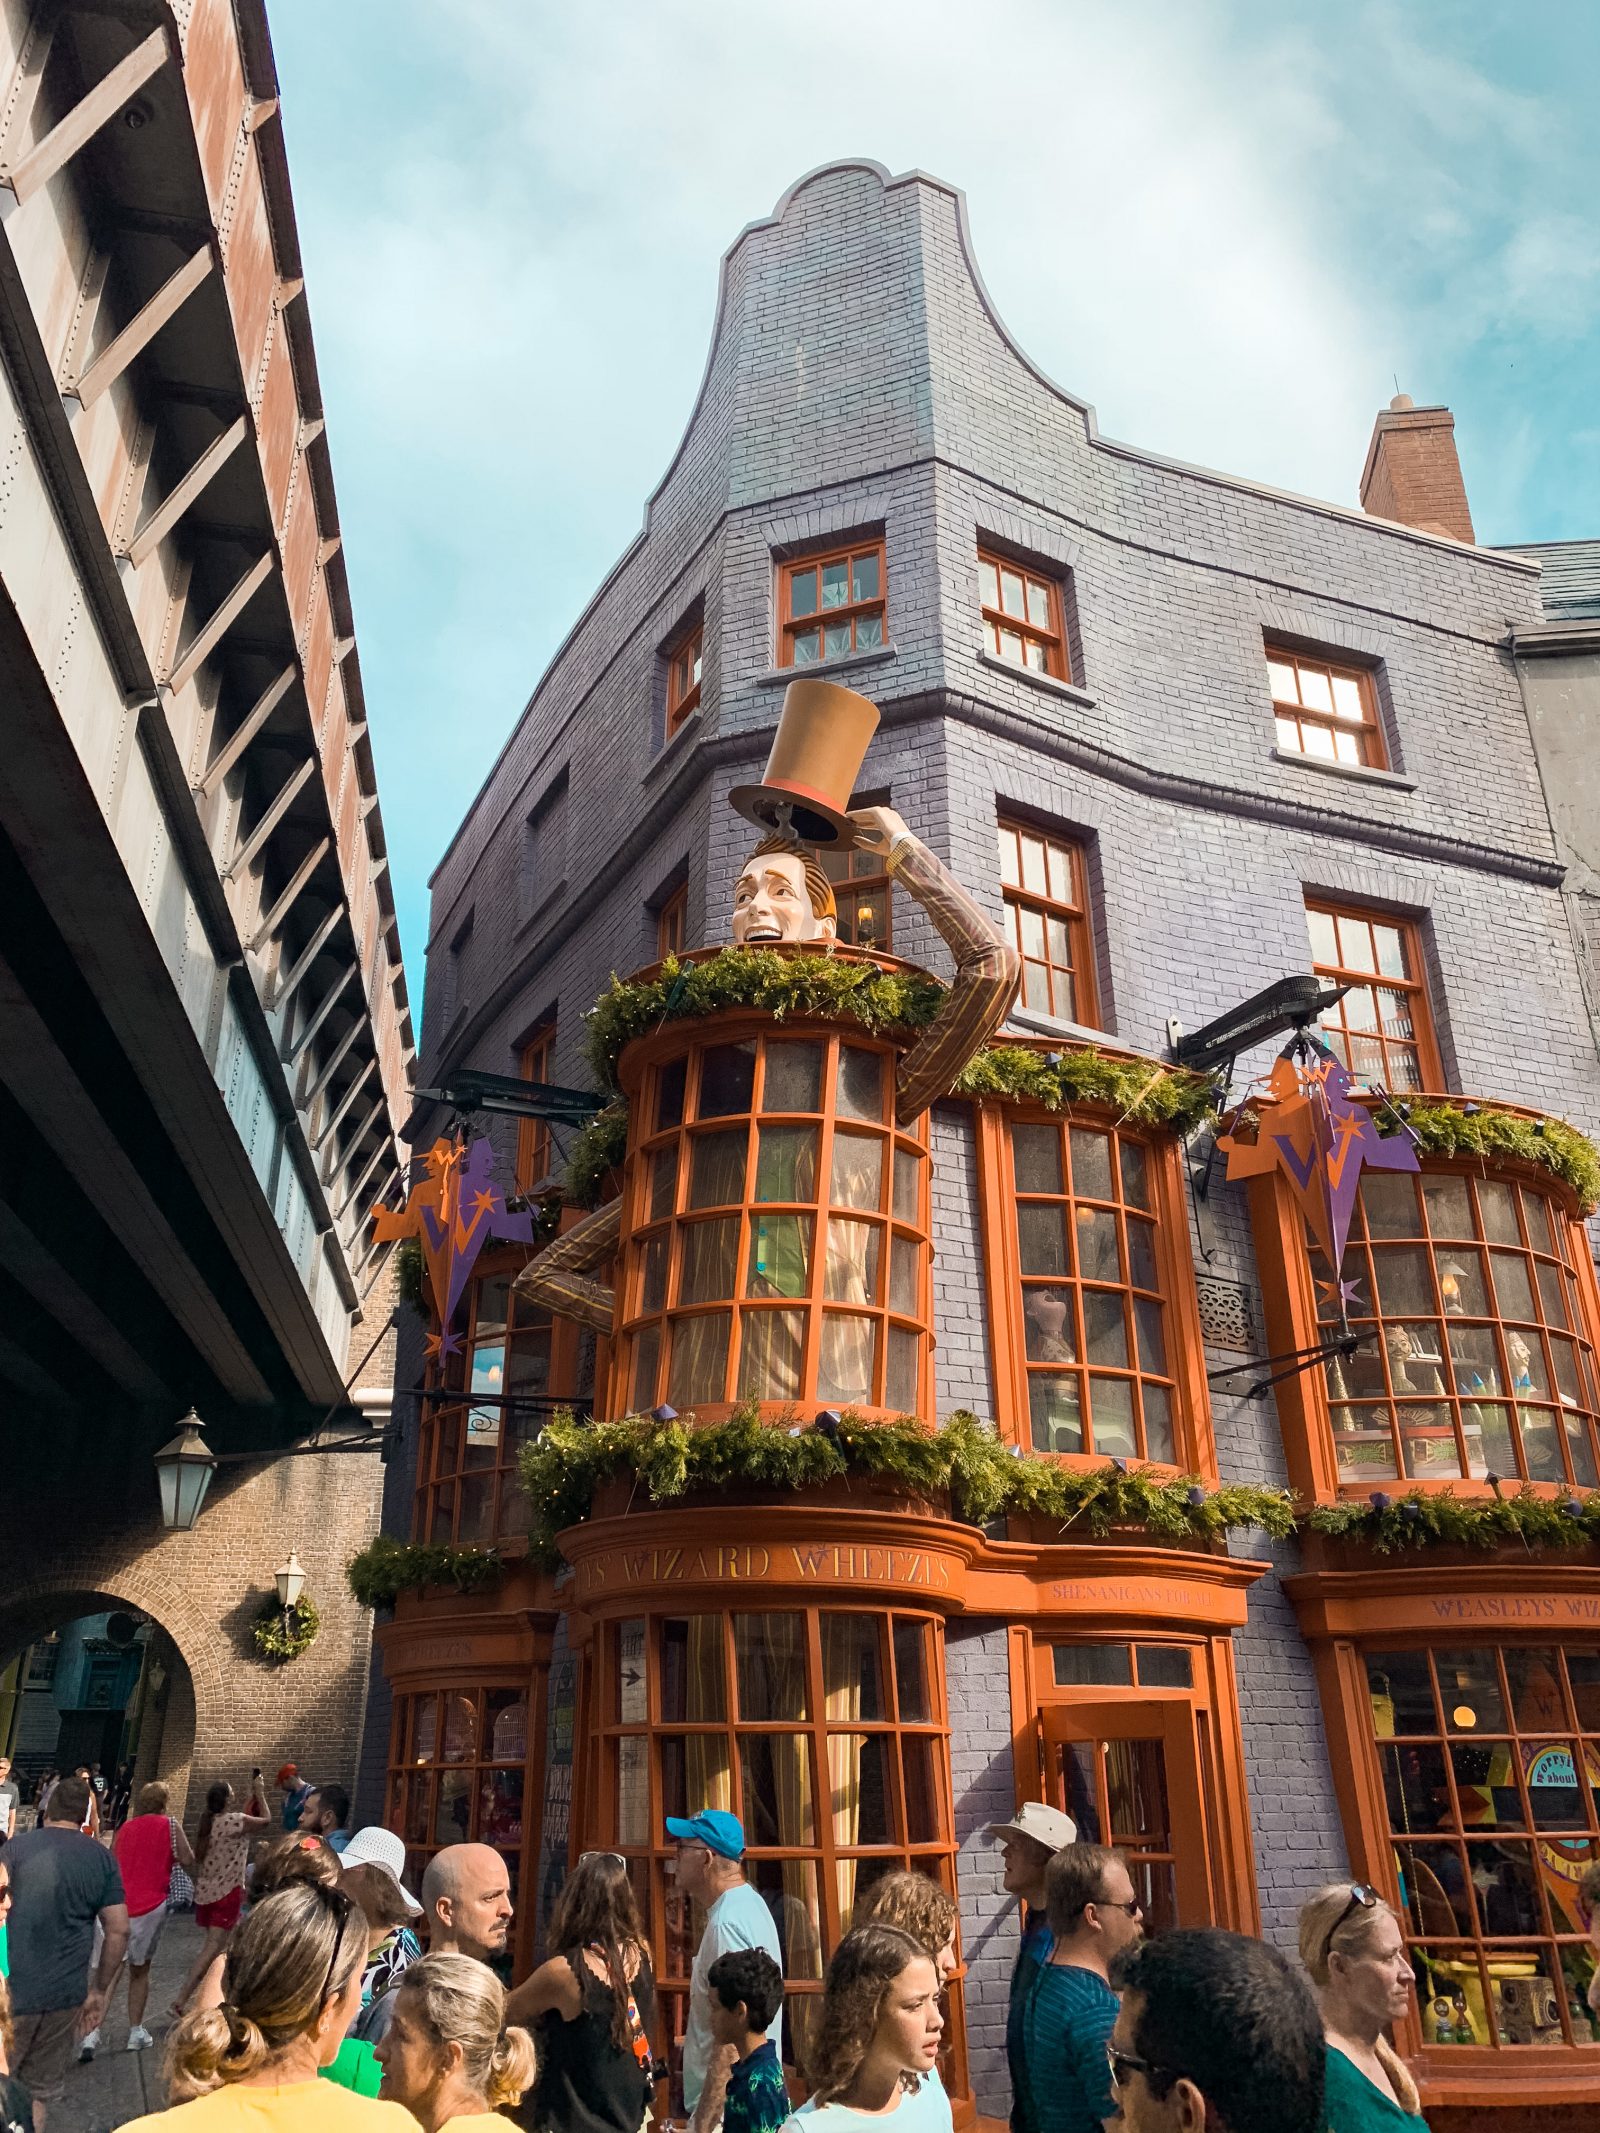 Weasley's Wizarding Wheezes at Wizarding World of Harry Potter